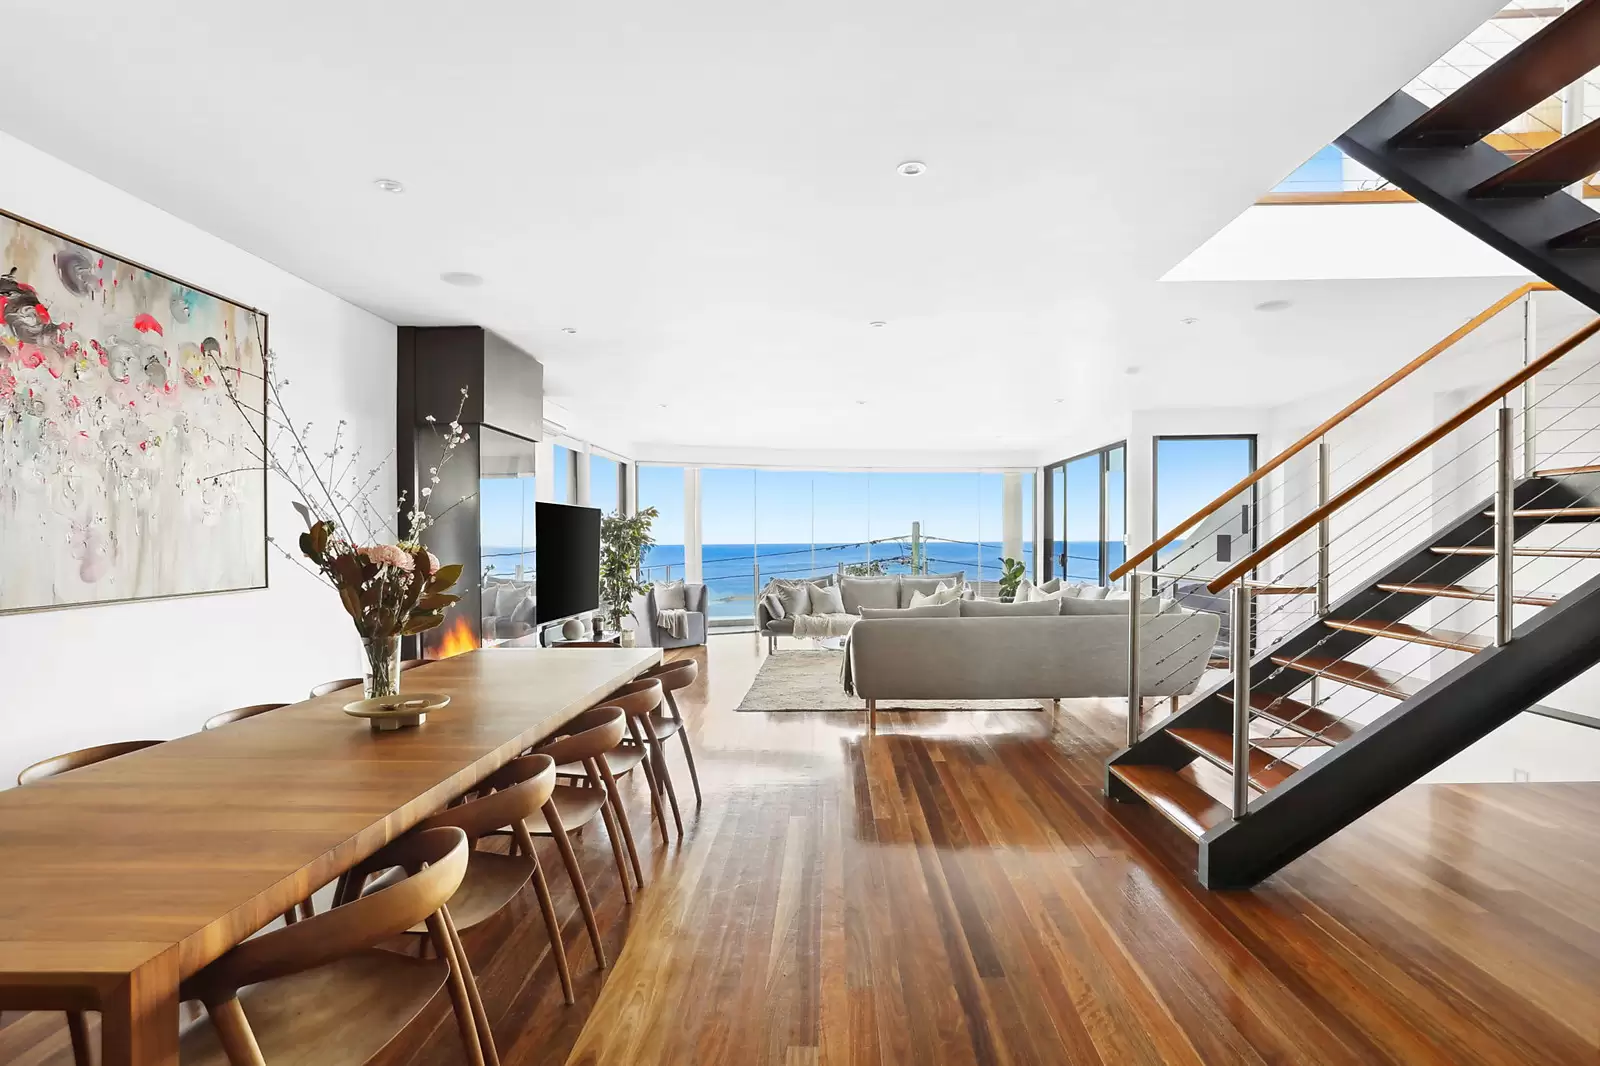 Photo #10: 68 Denning Street, South Coogee - Sold by Sydney Sotheby's International Realty